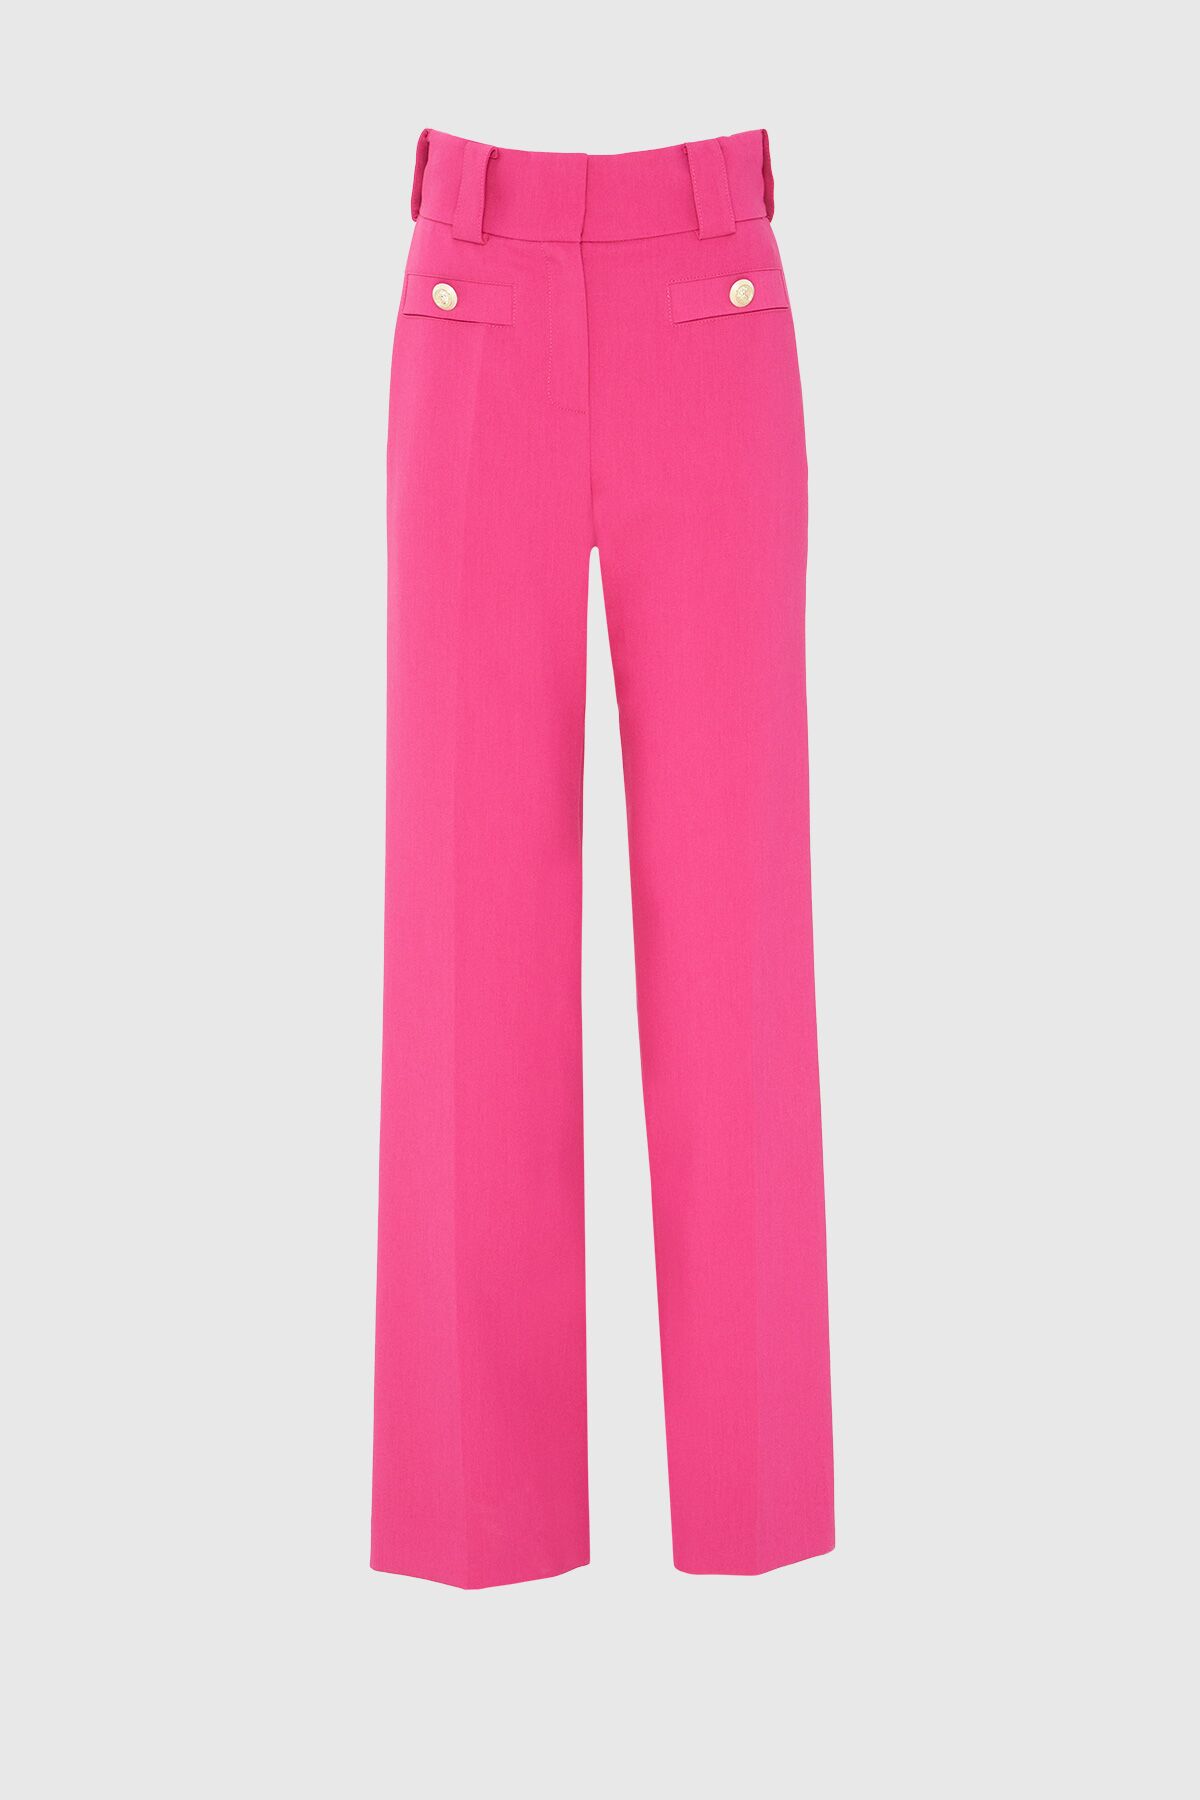  GIZIA - Gold Button Detailed High Waist Pink Trousers